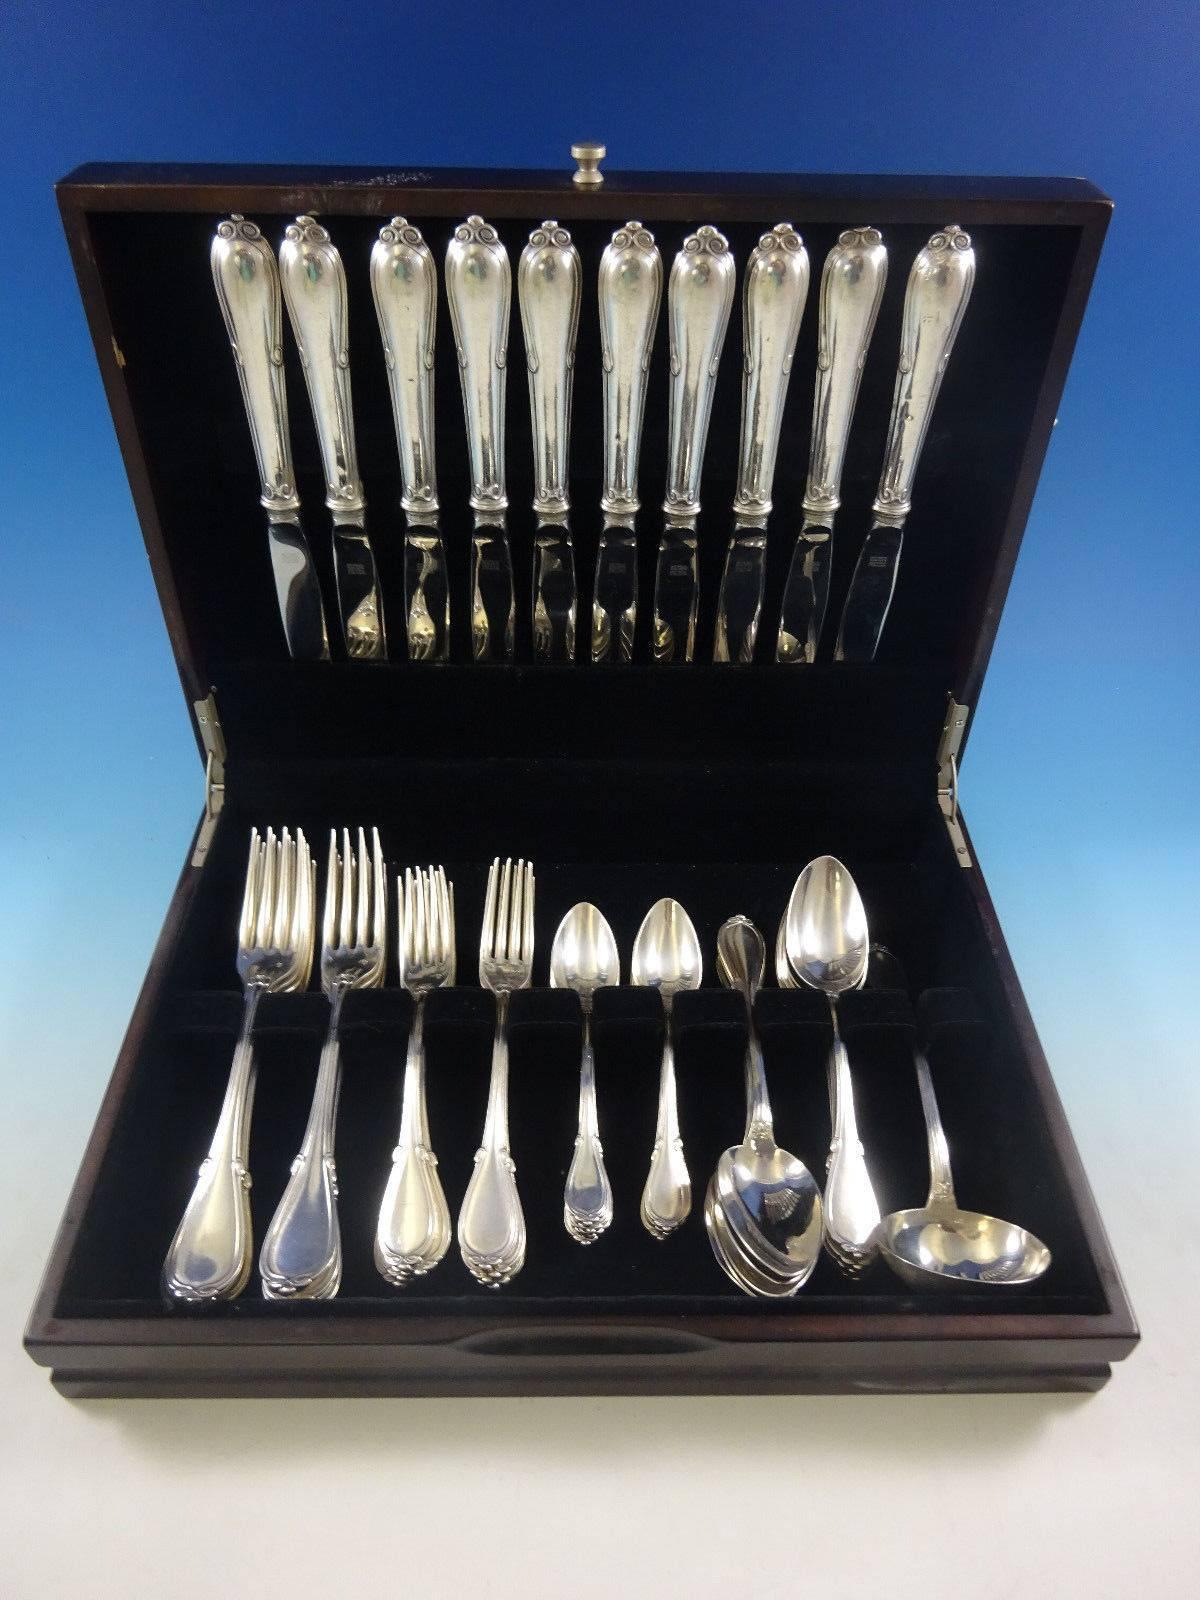 Dinner size Fontenelle by Odiot France 950 sterling silver flatware set, 51 pieces. This set includes: 

ten dinner size knives, 10